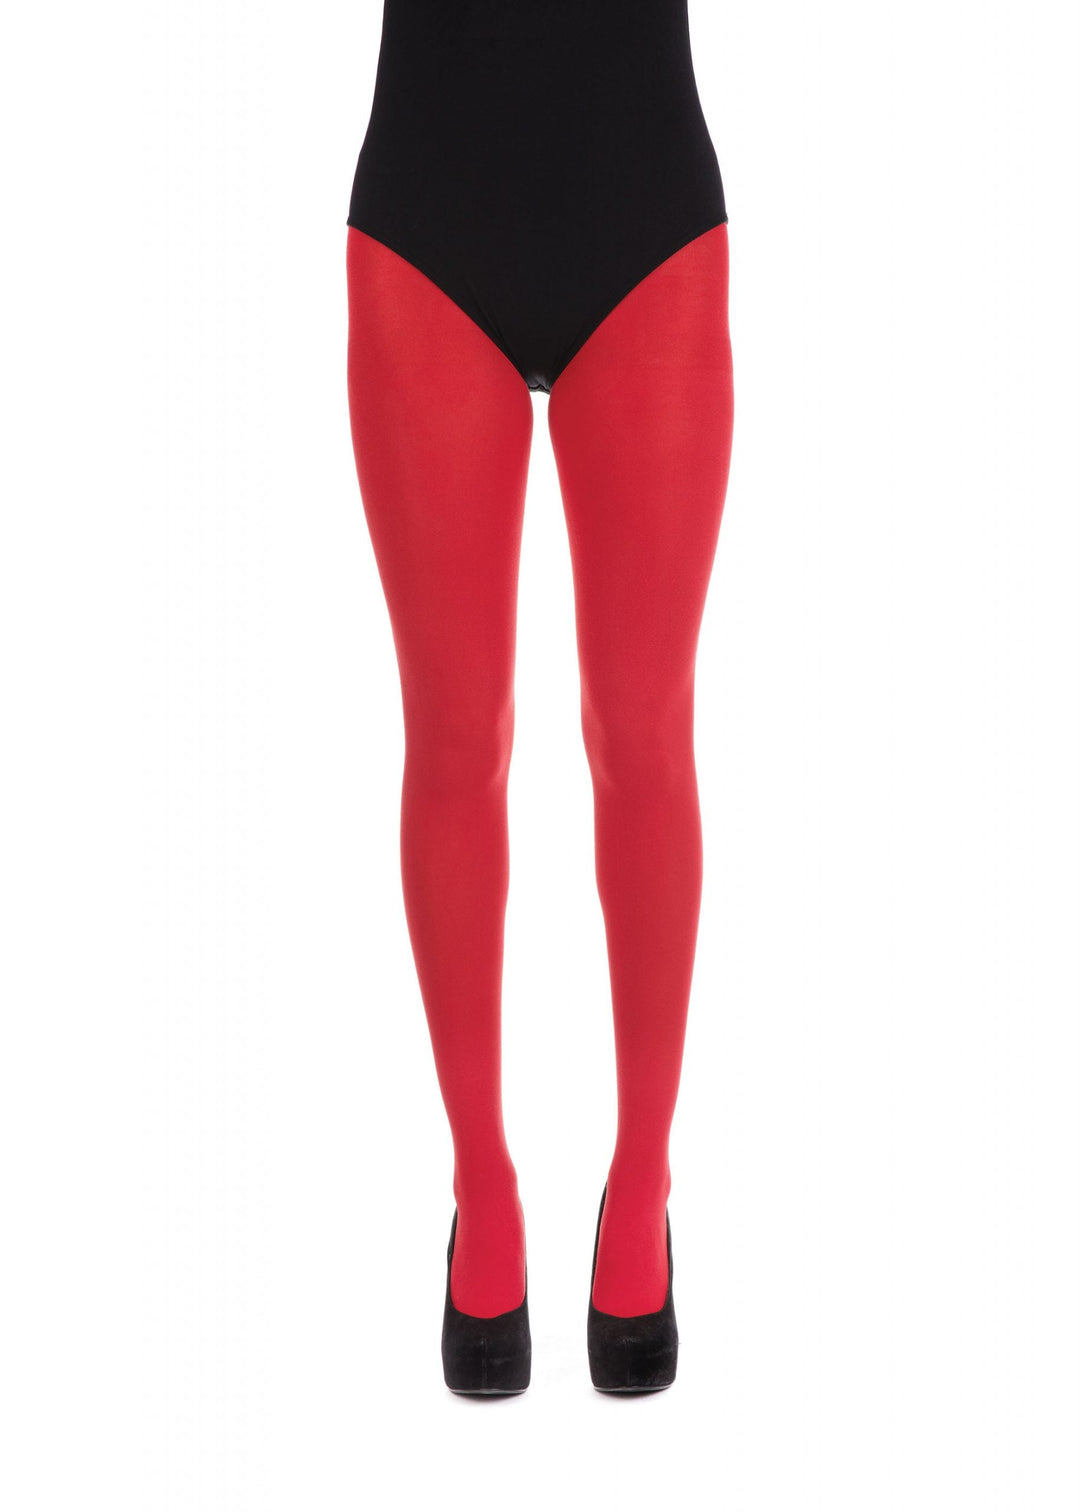 Red Tights Ladies Christmas Costume Accessory_1